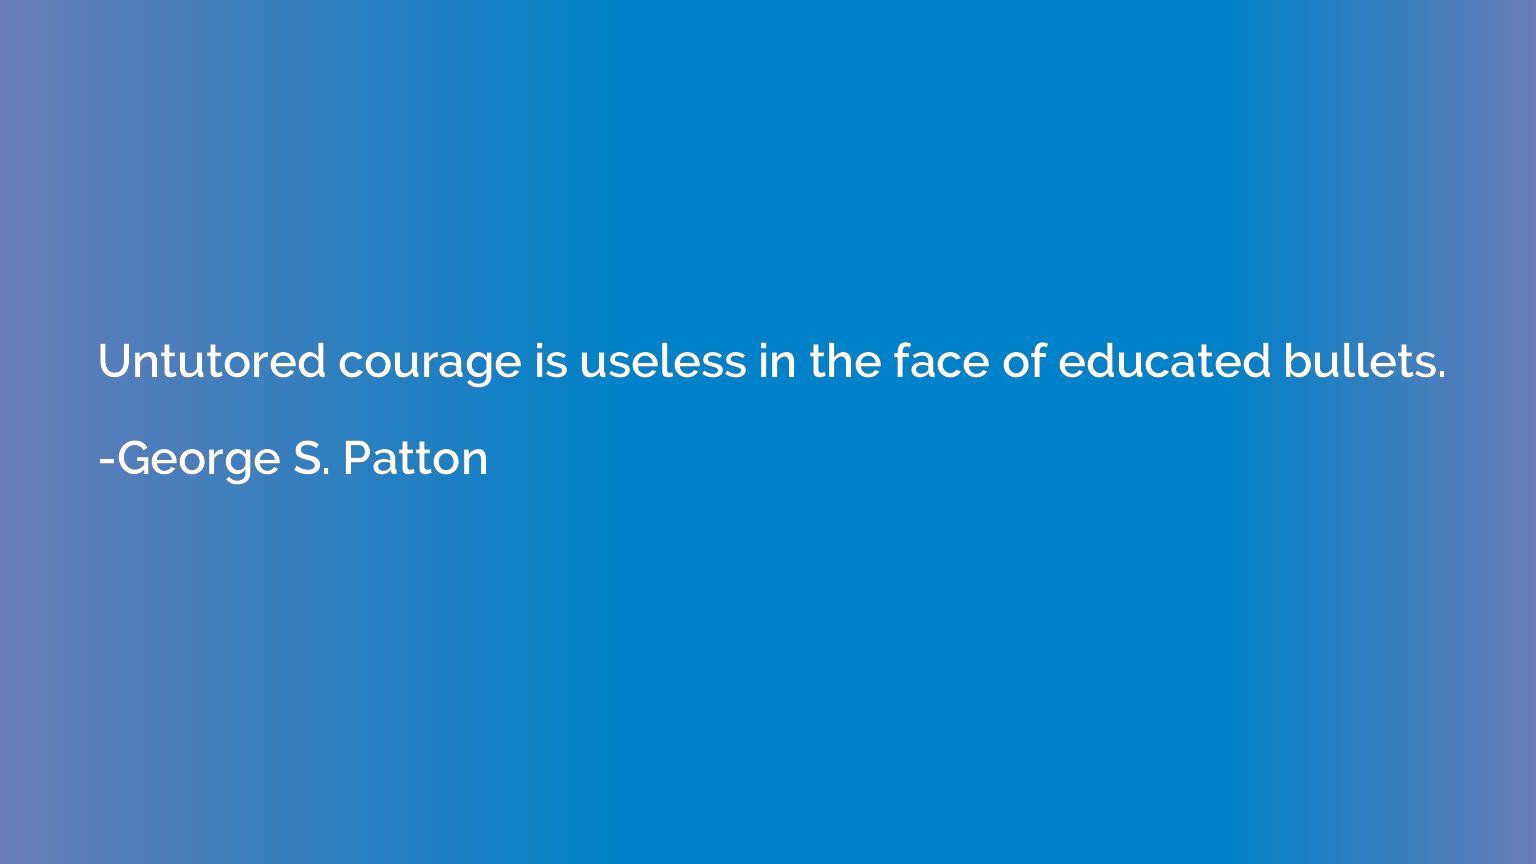 Untutored courage is useless in the face of educated bullets